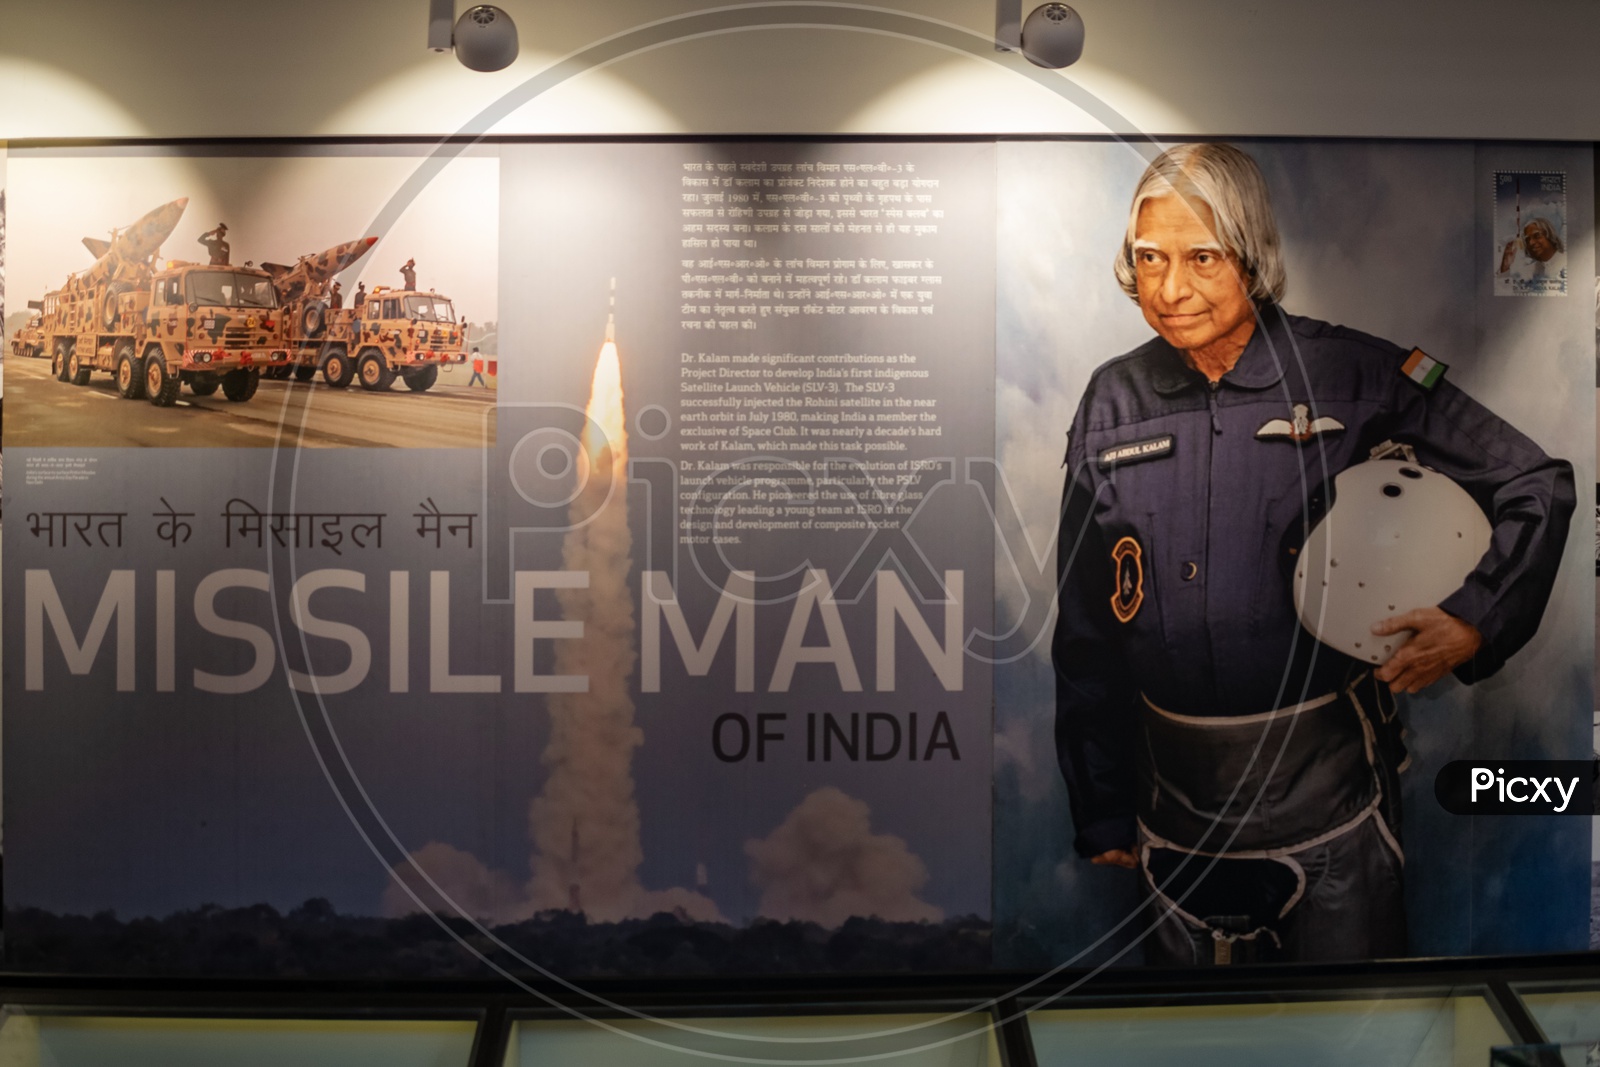 A picture showing Dr. A.P.J Abdul Kalam as Missile Man of India at A.P.J Abdul Kalam Memorial, Dilli Haat